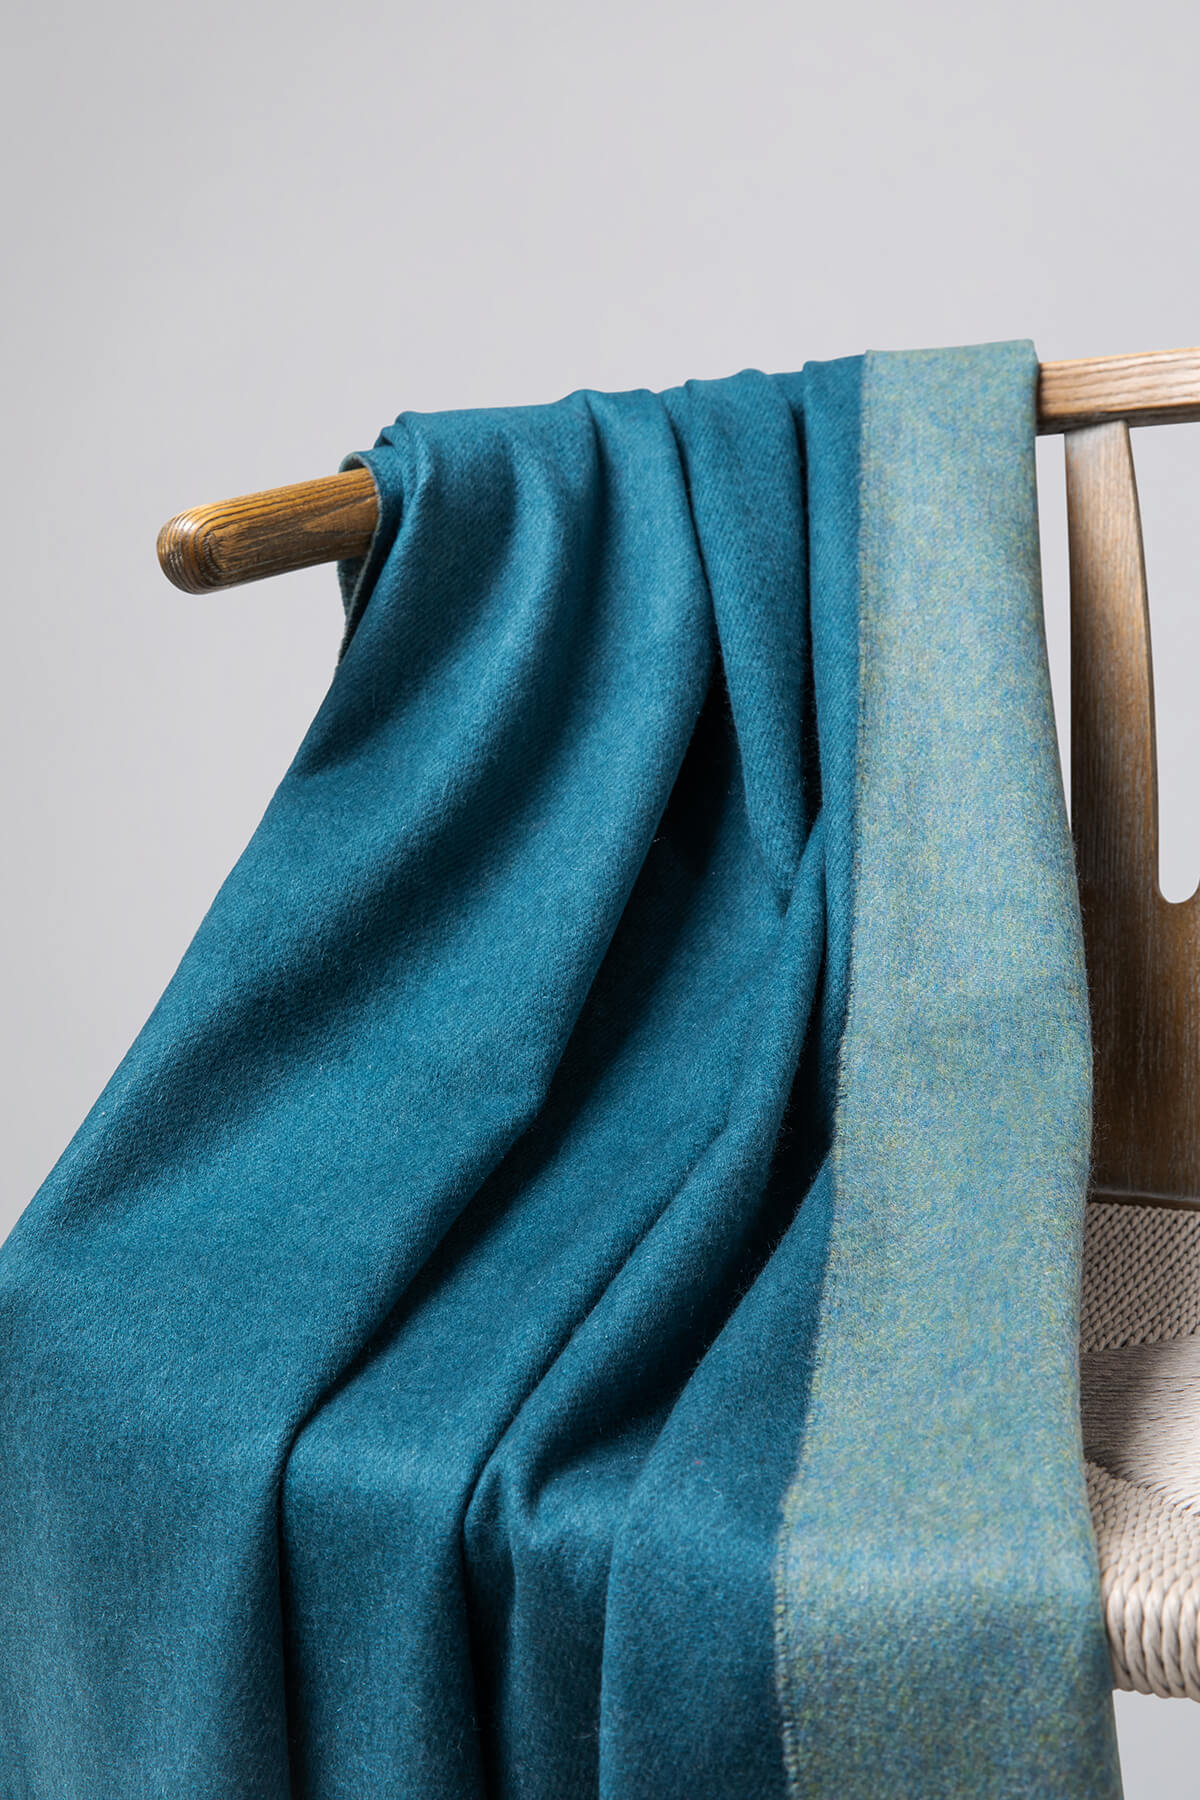 Details of Johnstons of Elgin Reversible Pure Cashmere Throw in Teal & Lovat draped over a wooden chair on a white background WA000013RU7257ONE